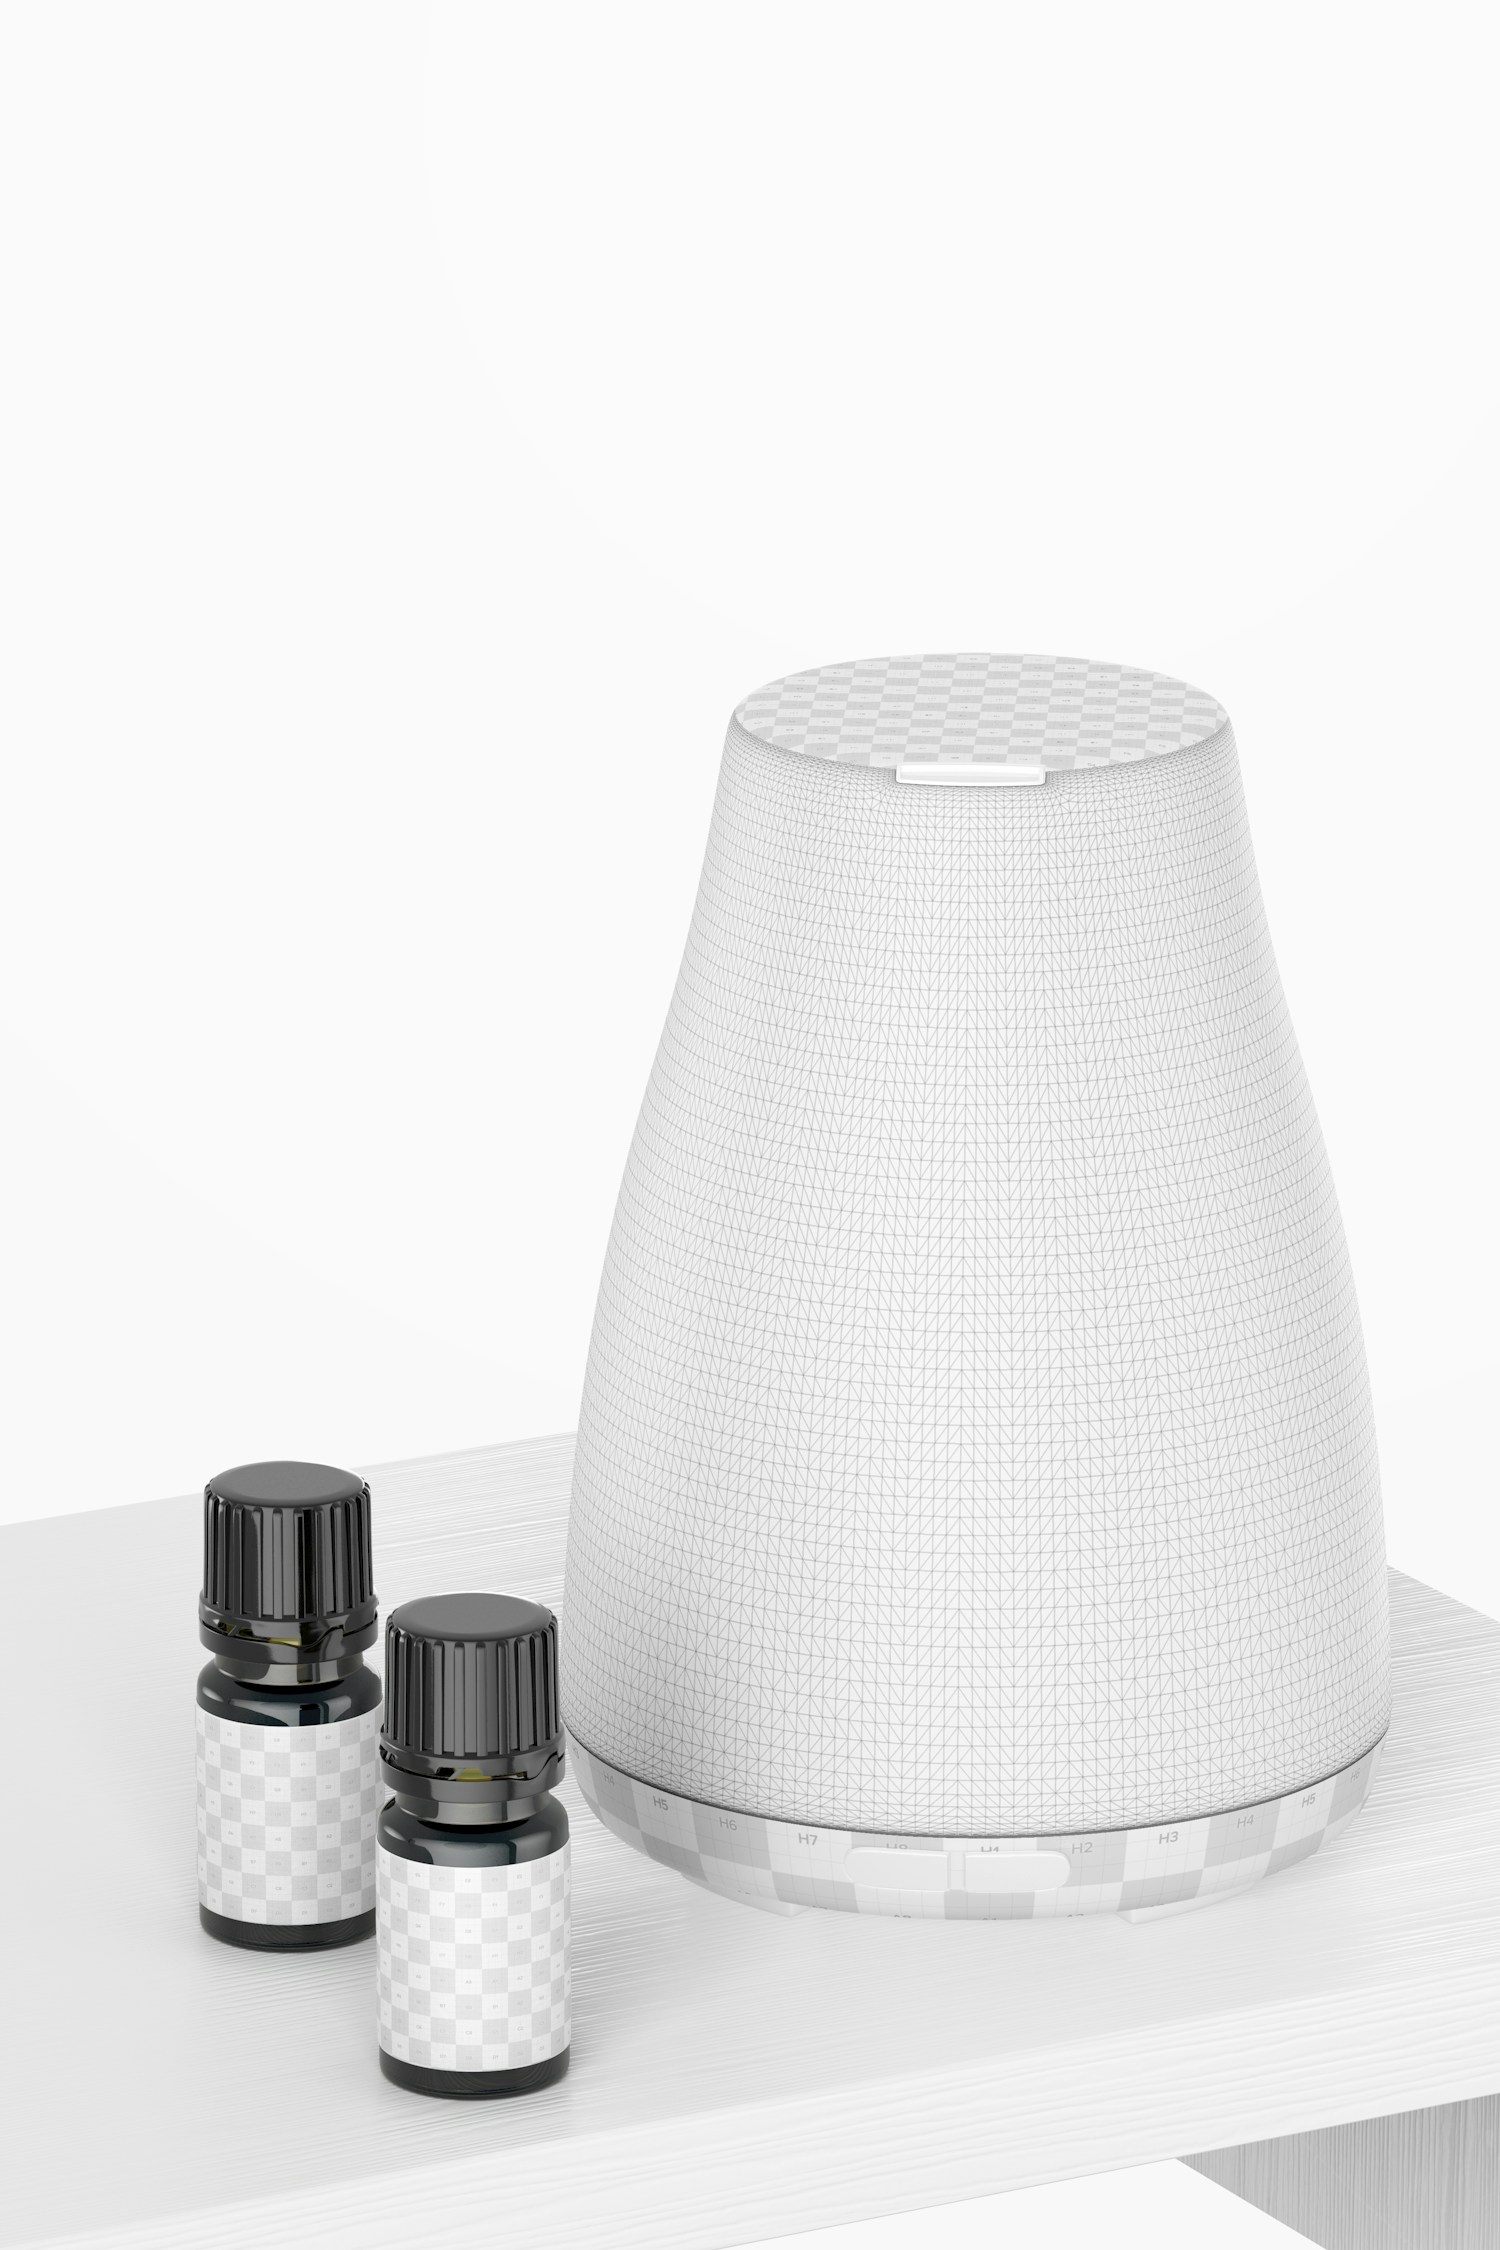 Mist Humidifier Mockup, Perspective